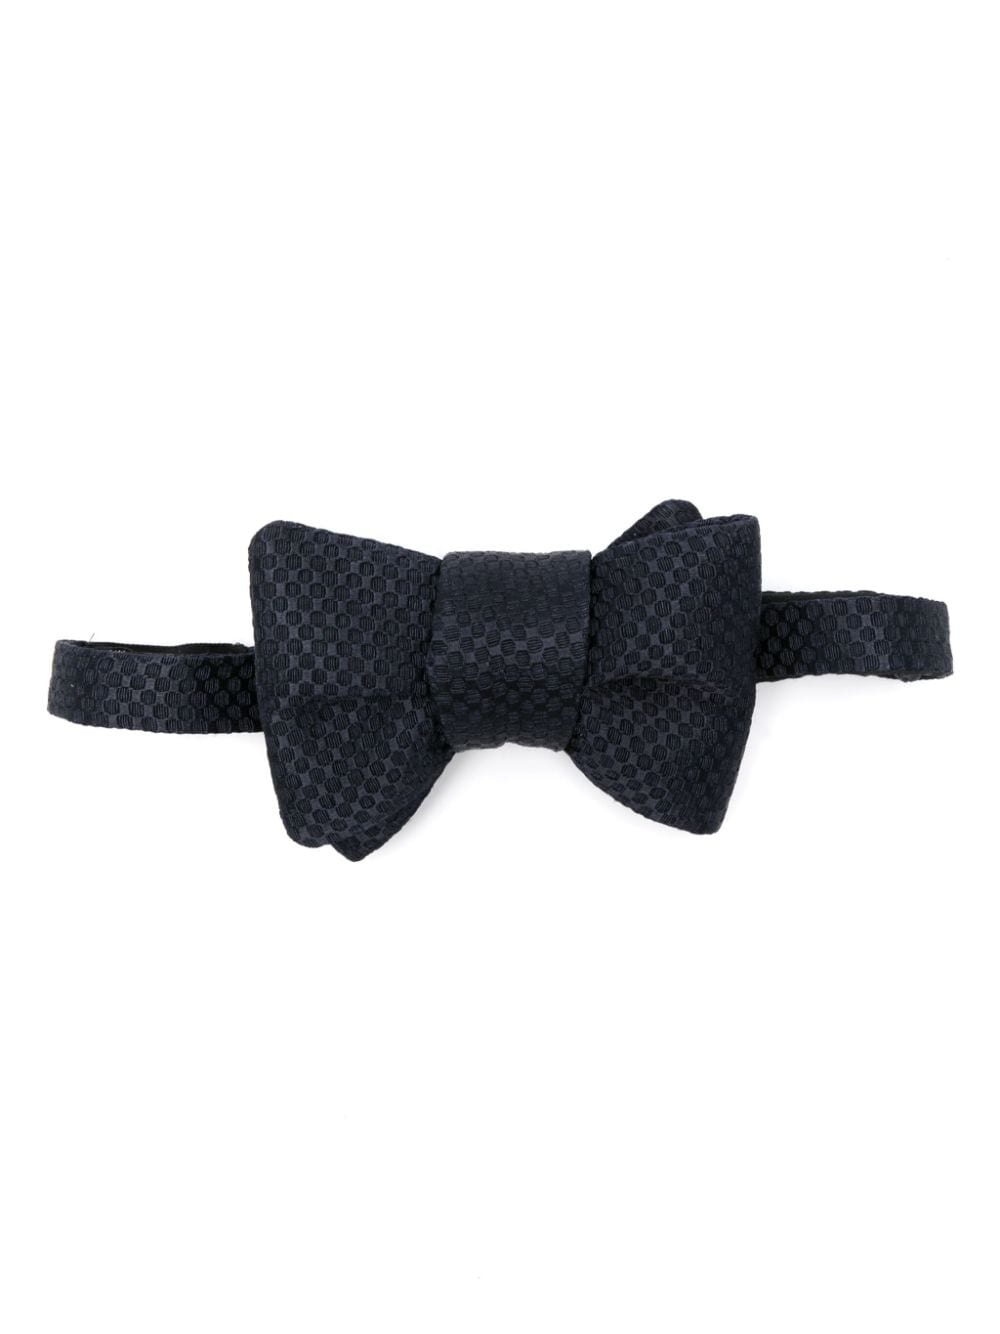 honeycomb-detailed bow tie - 1